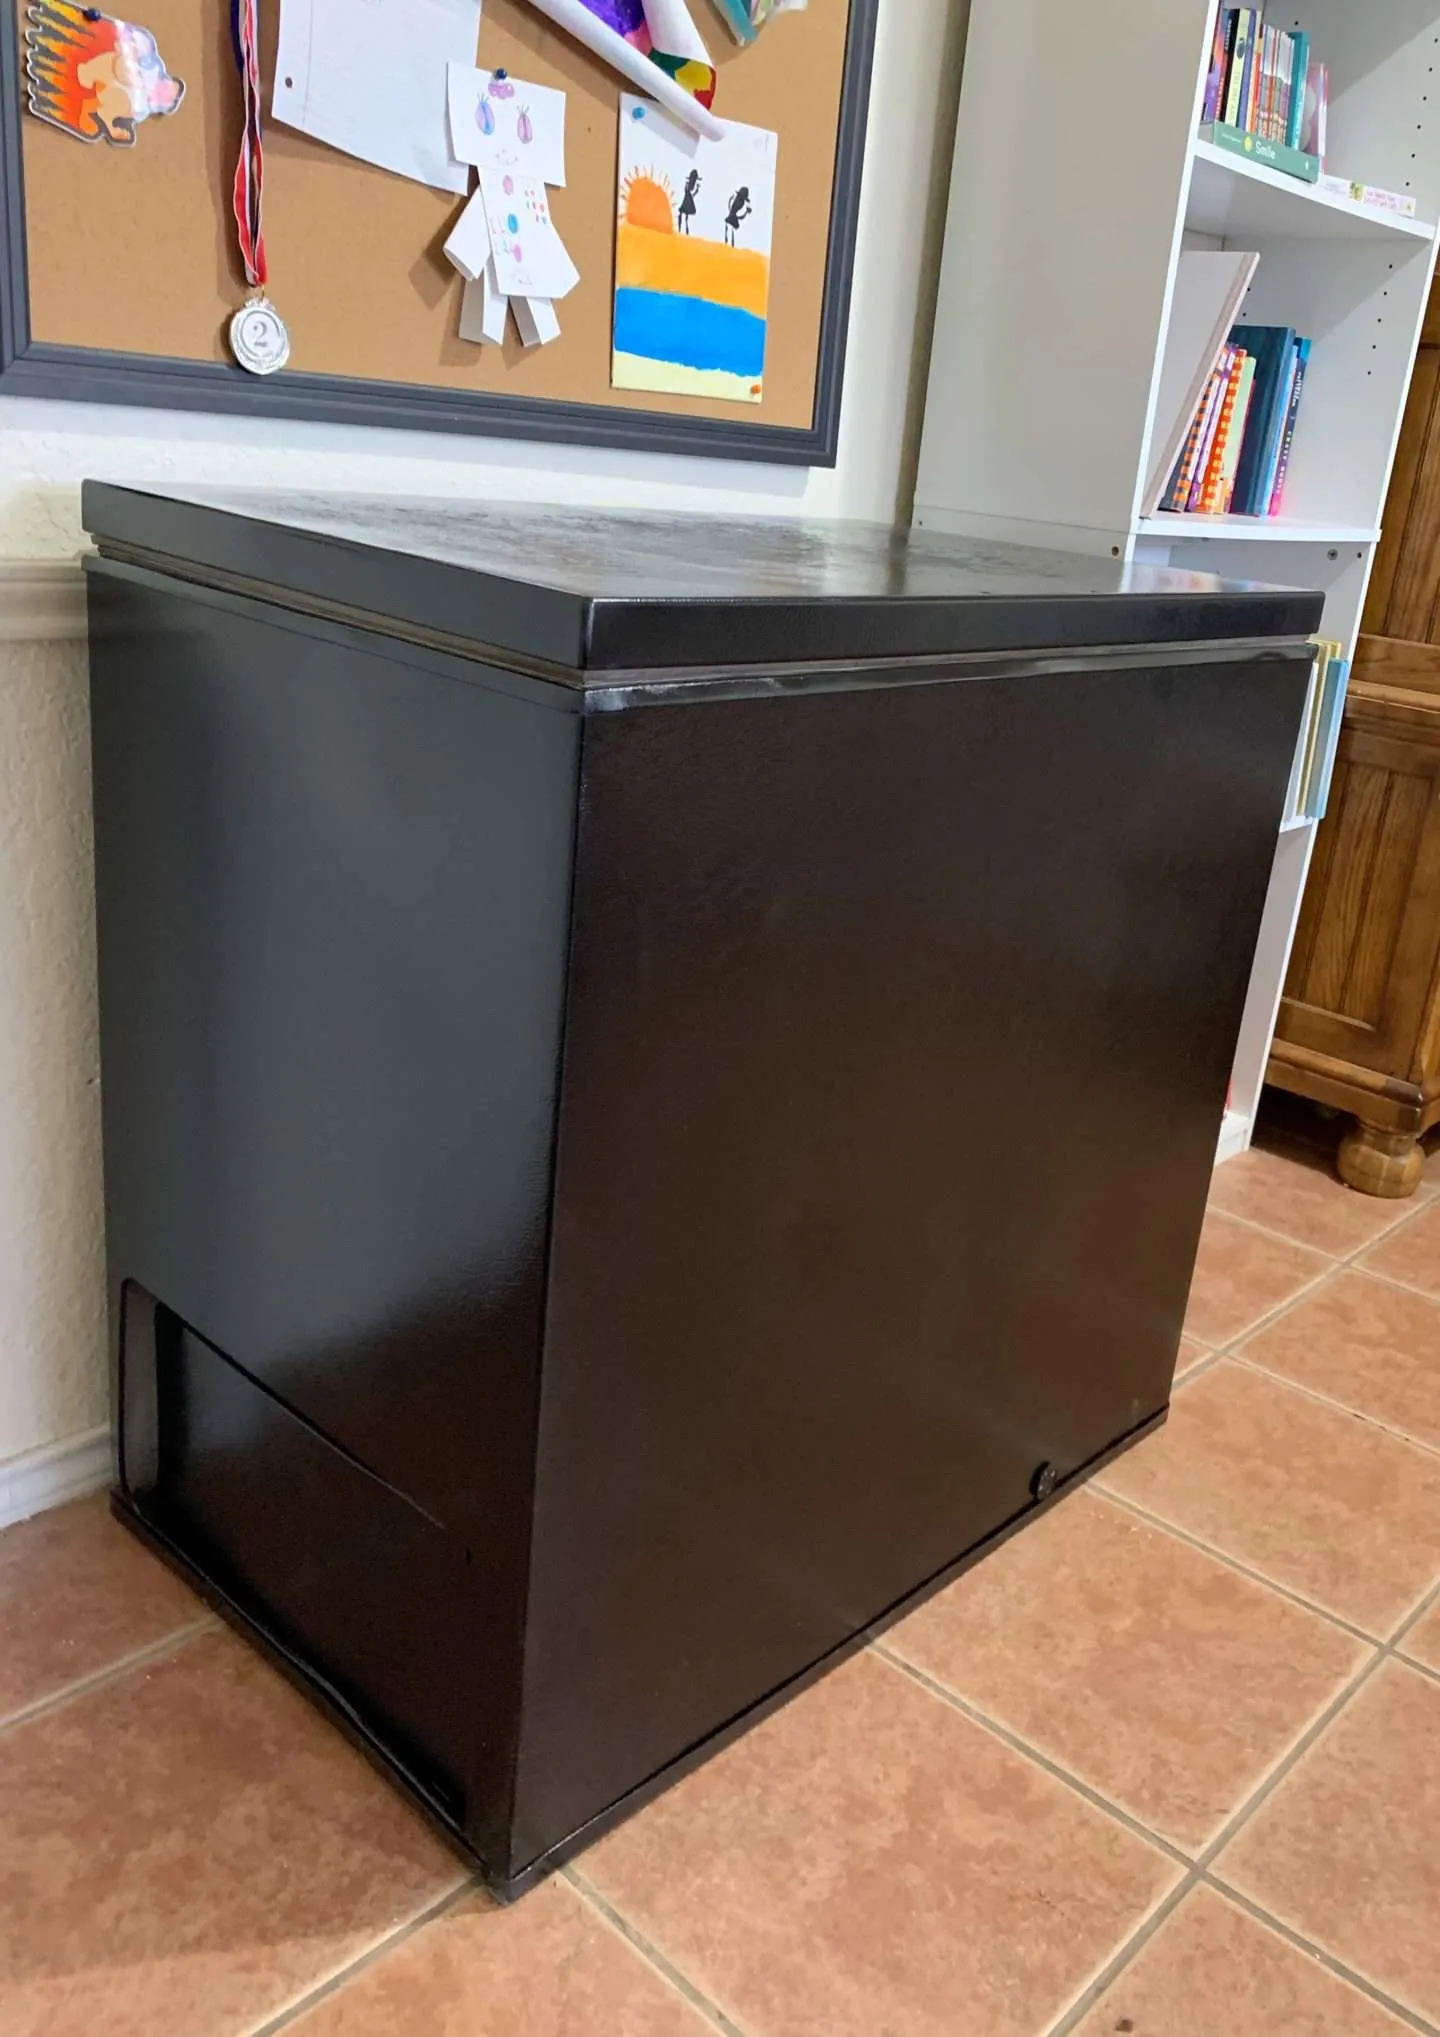 How to paint a rusty deep freezer: after picture